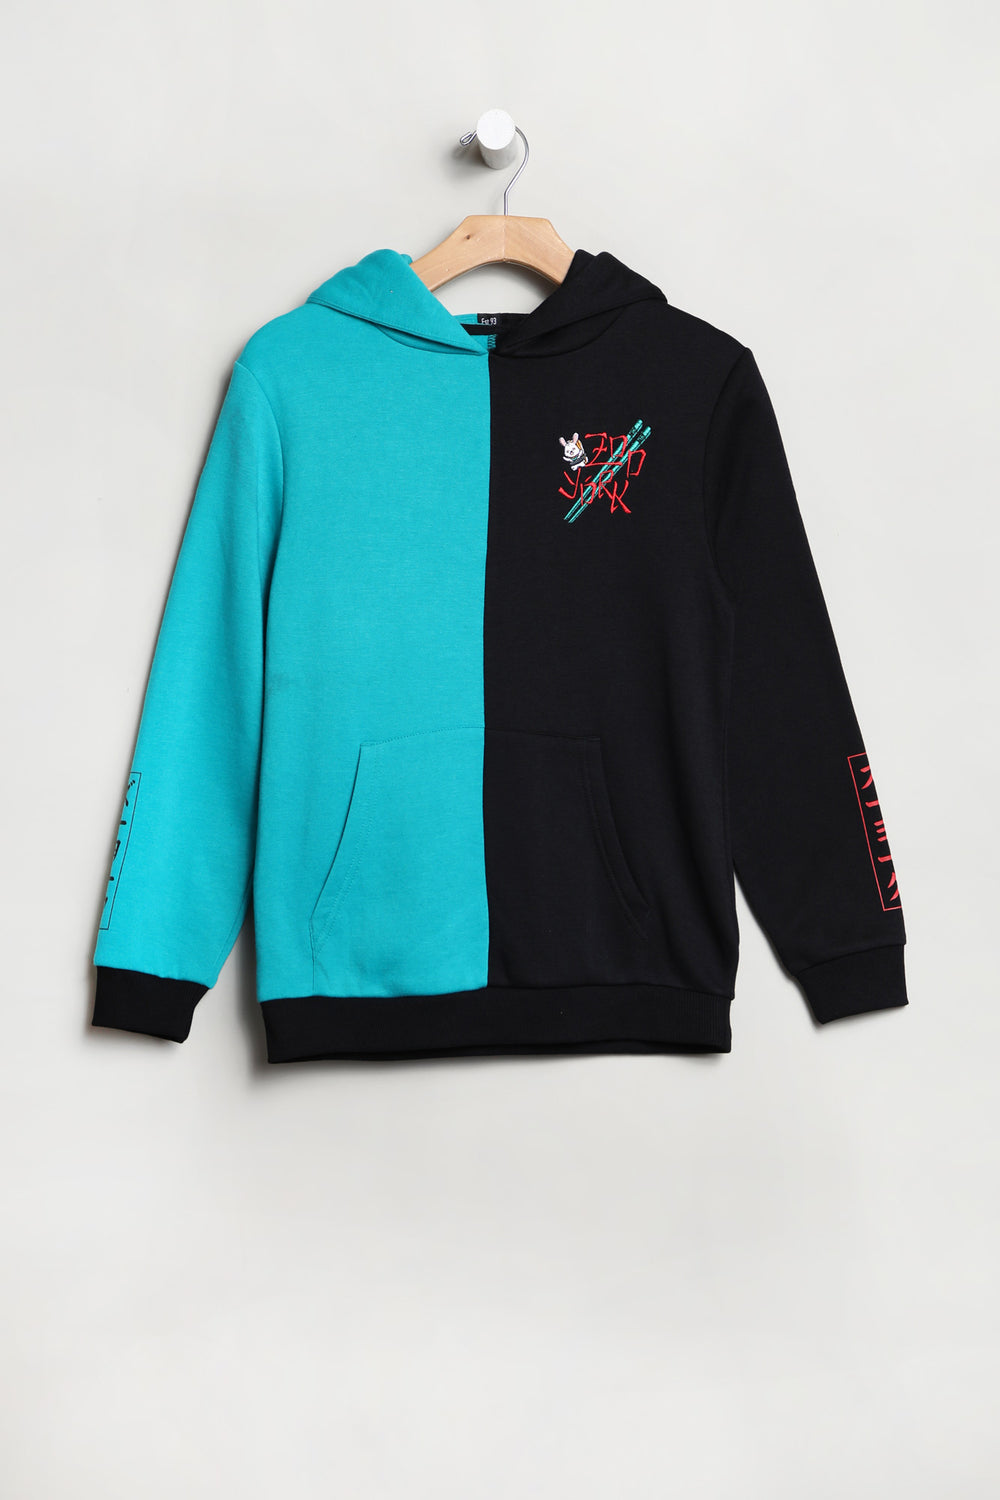 Zoo York Youth Colour Block Graphic Hoodie Black